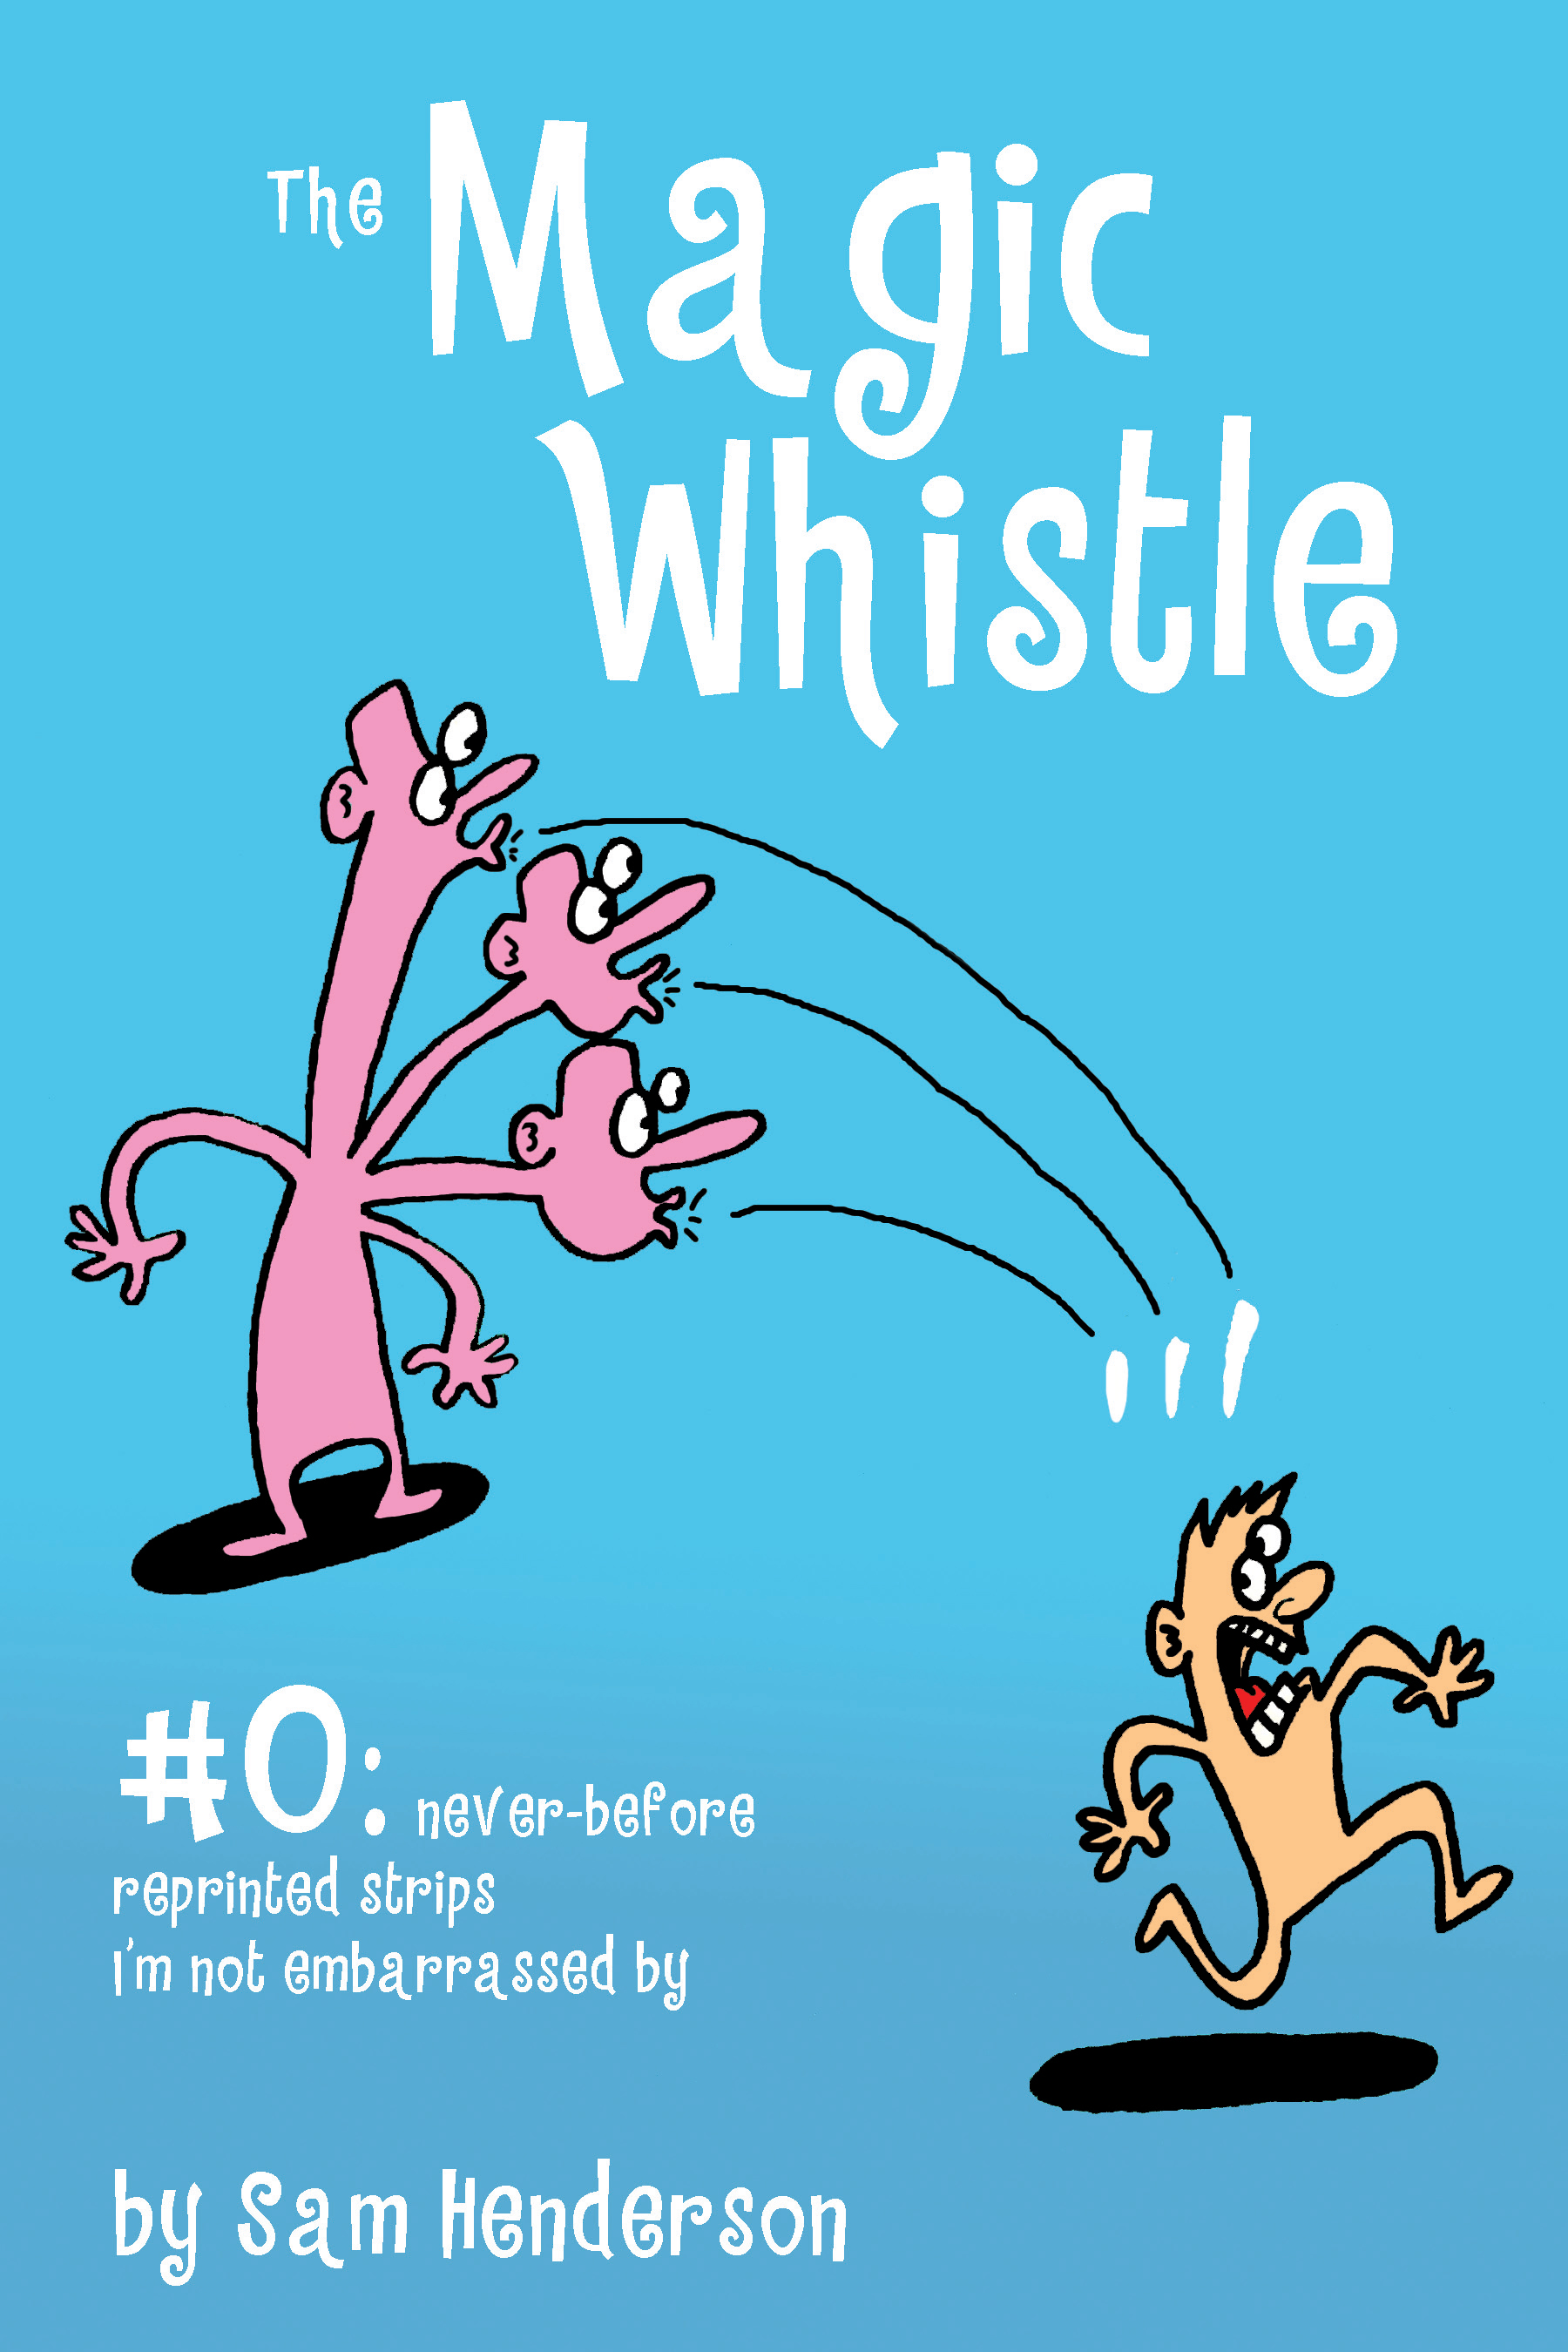 Free Magic Whistle #0 For You